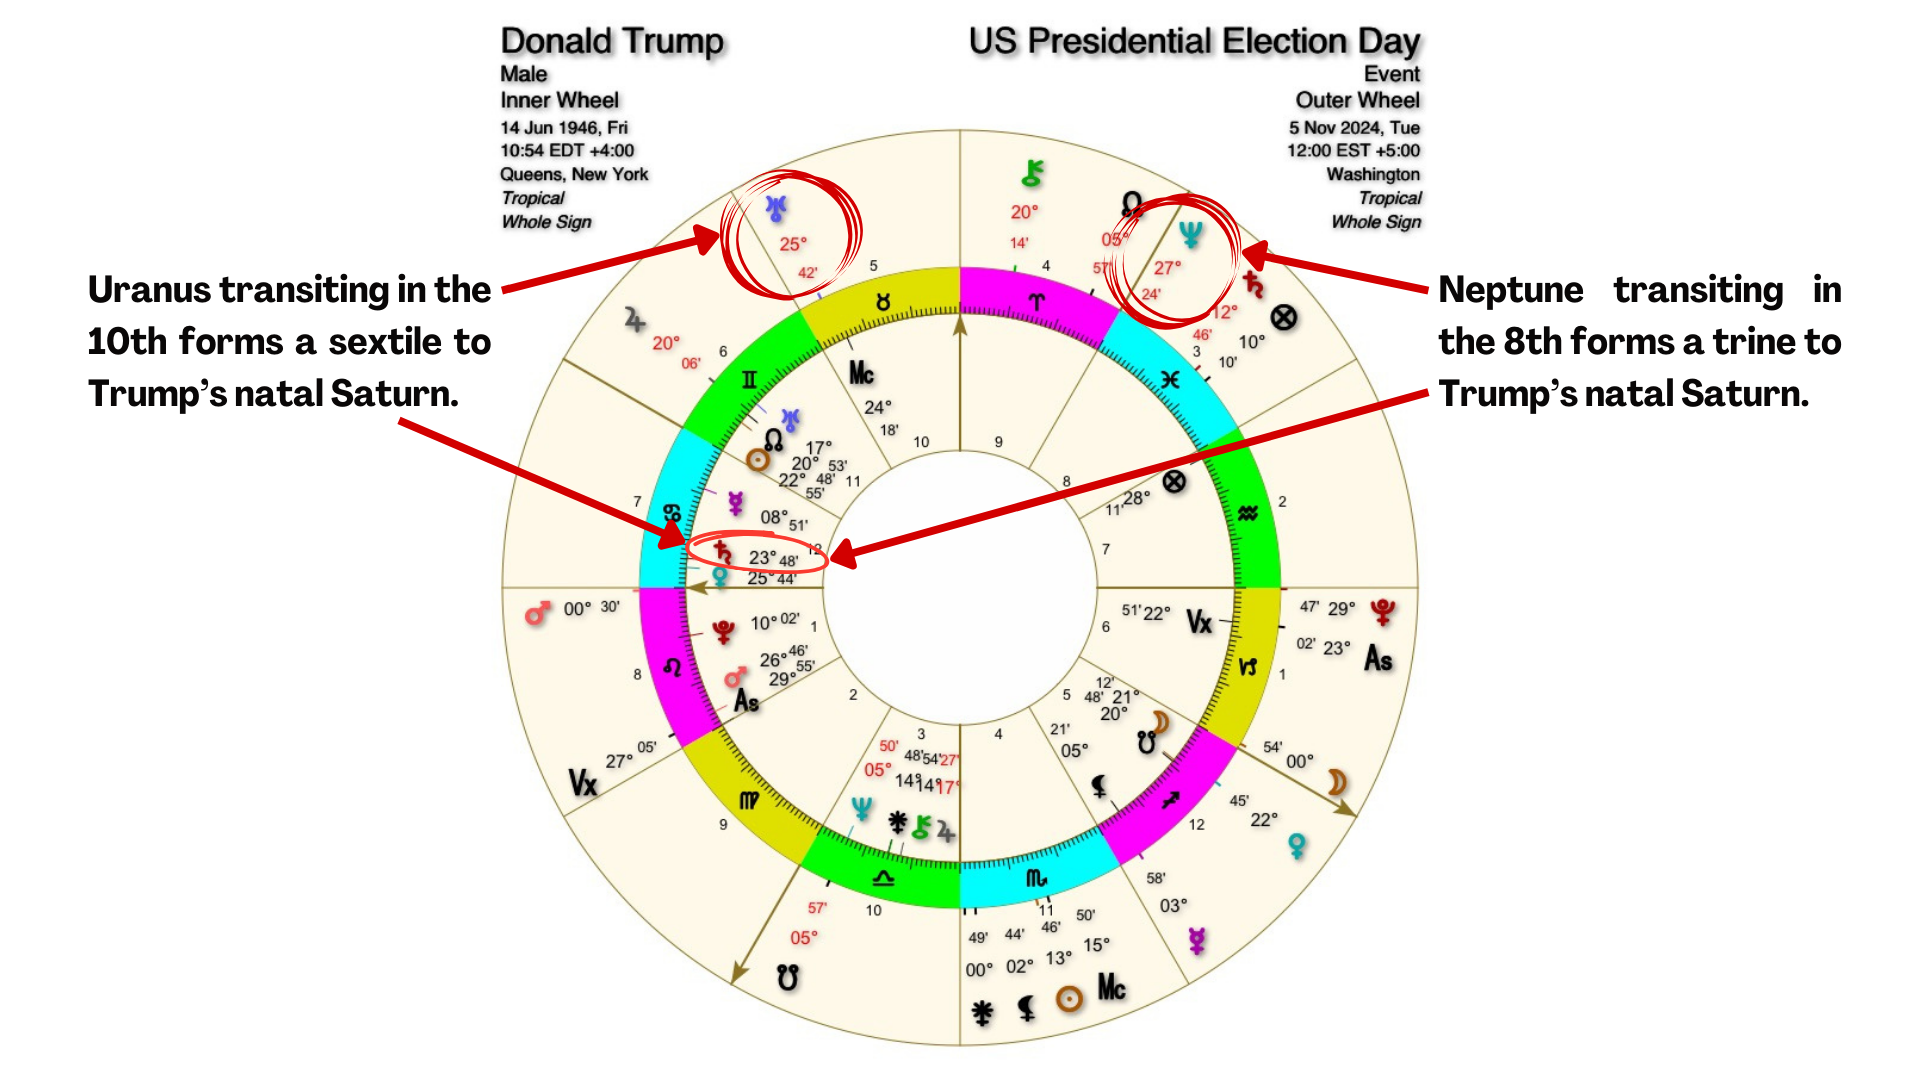 US Presidential Election Day transit chart with Donald Trump (Part 1)